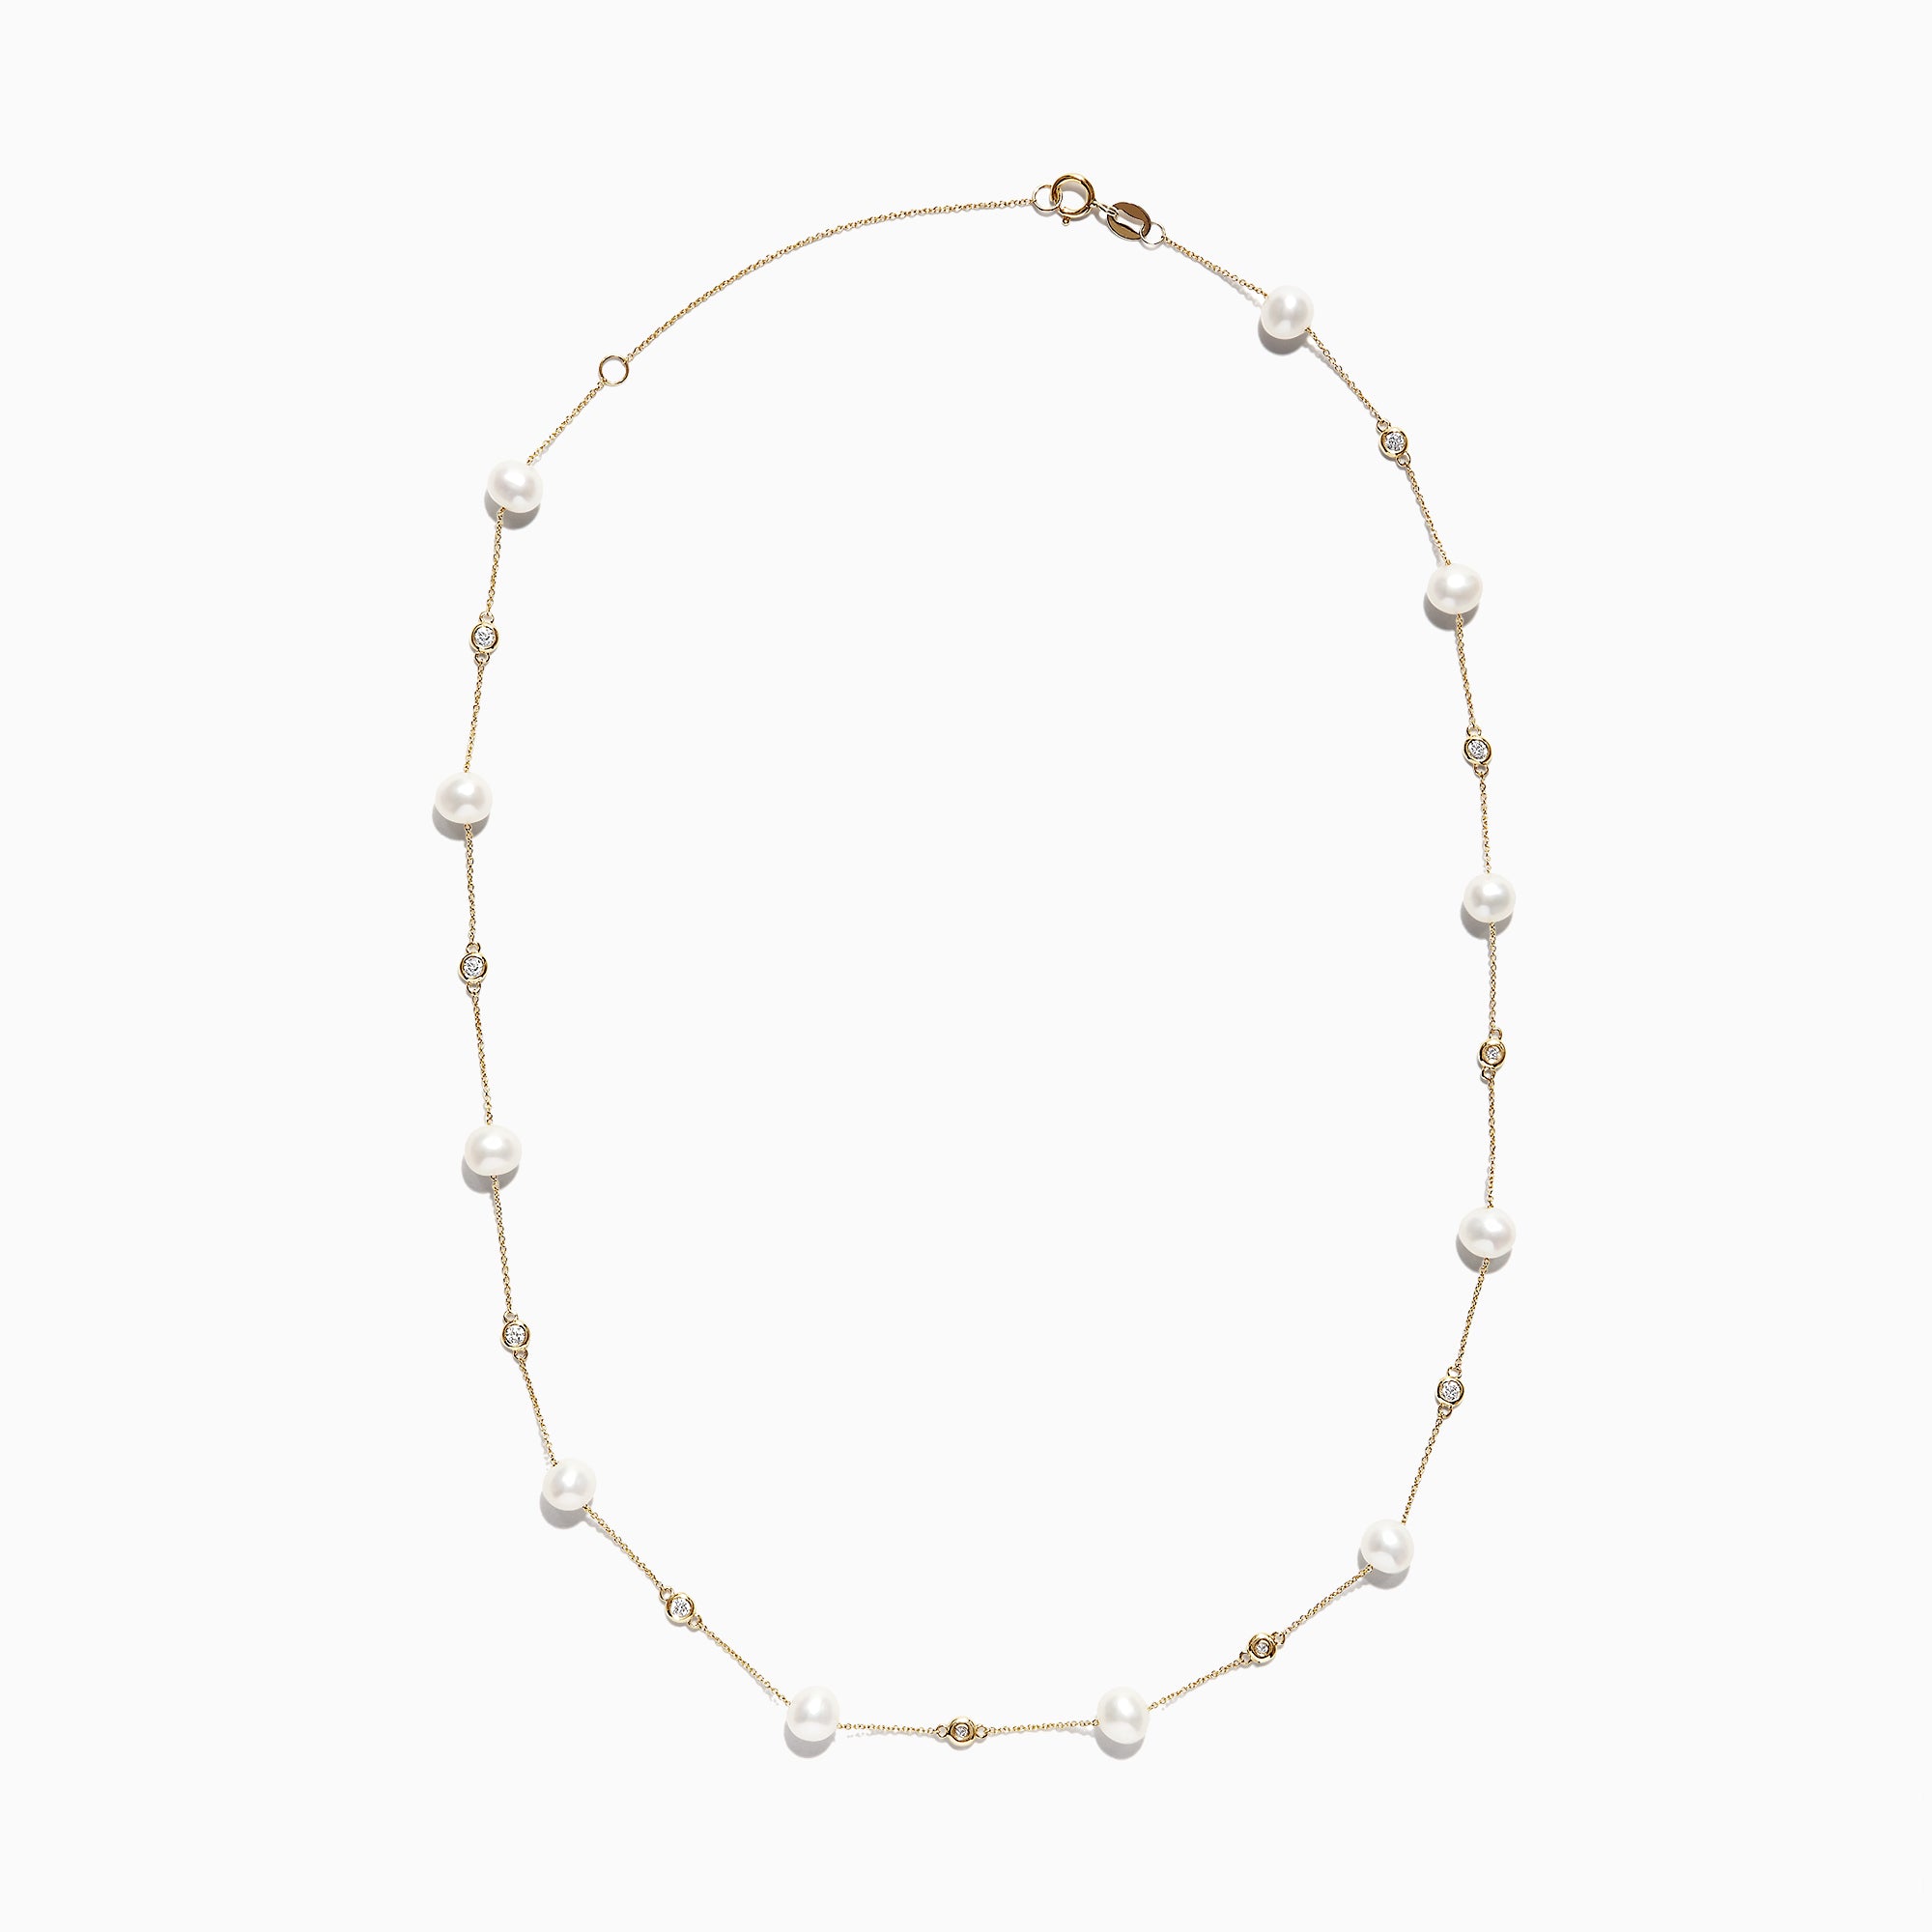 Effy 14K Yellow Gold Diamond and Fresh Water Pearl Necklace, 0.34 TCW